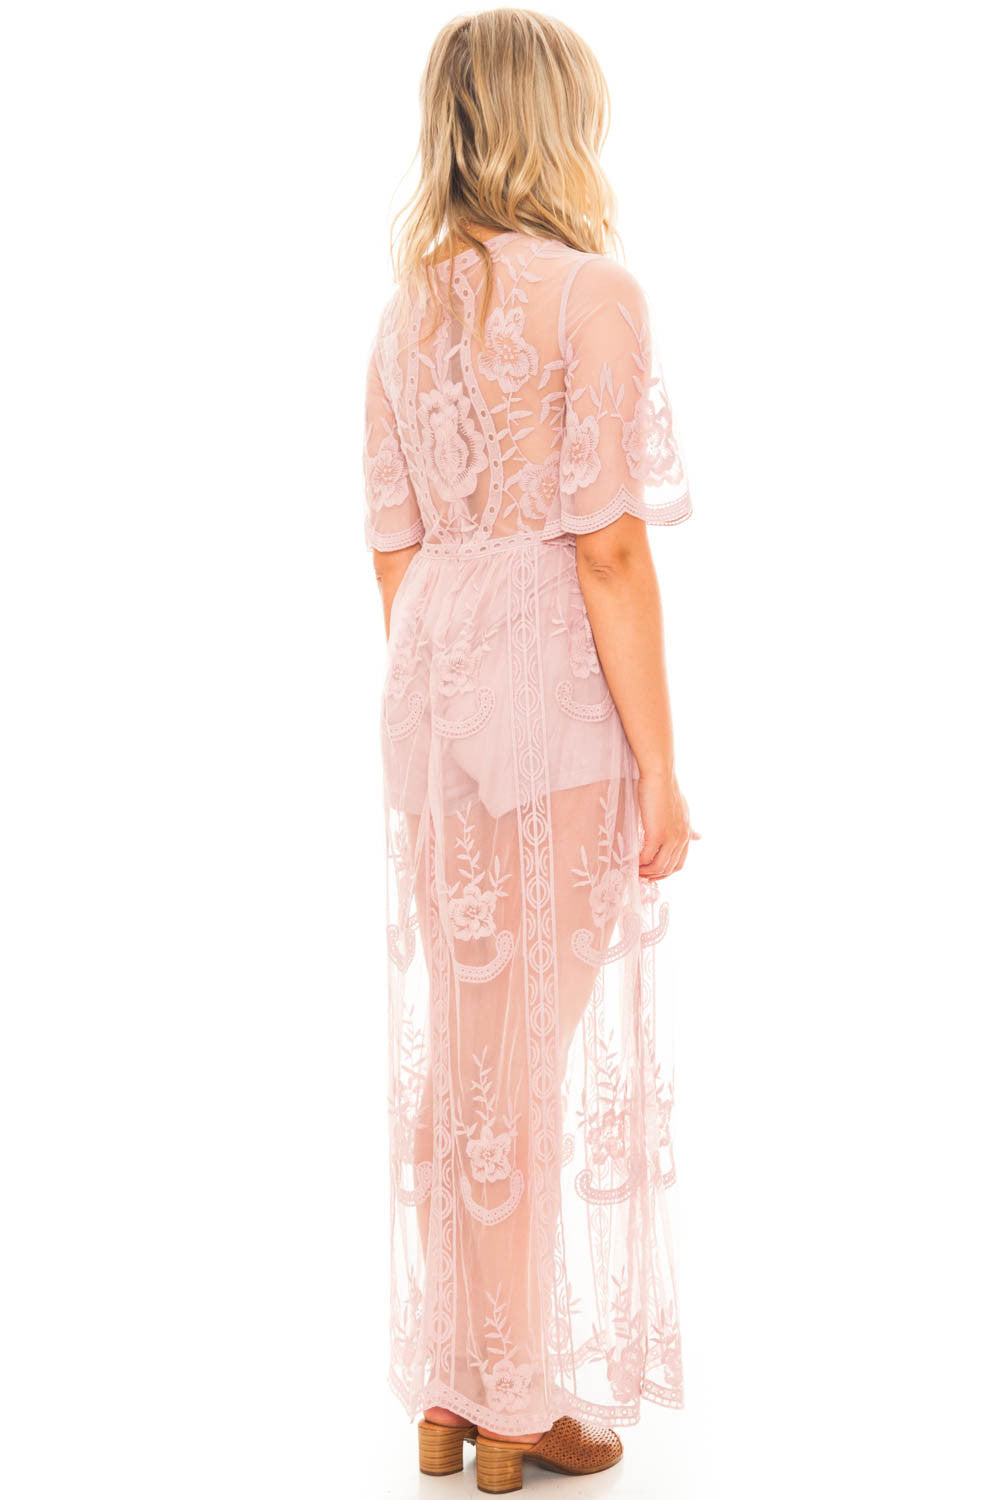 Dress - Plunging Maxi Romper With Lace Skirt Overlay